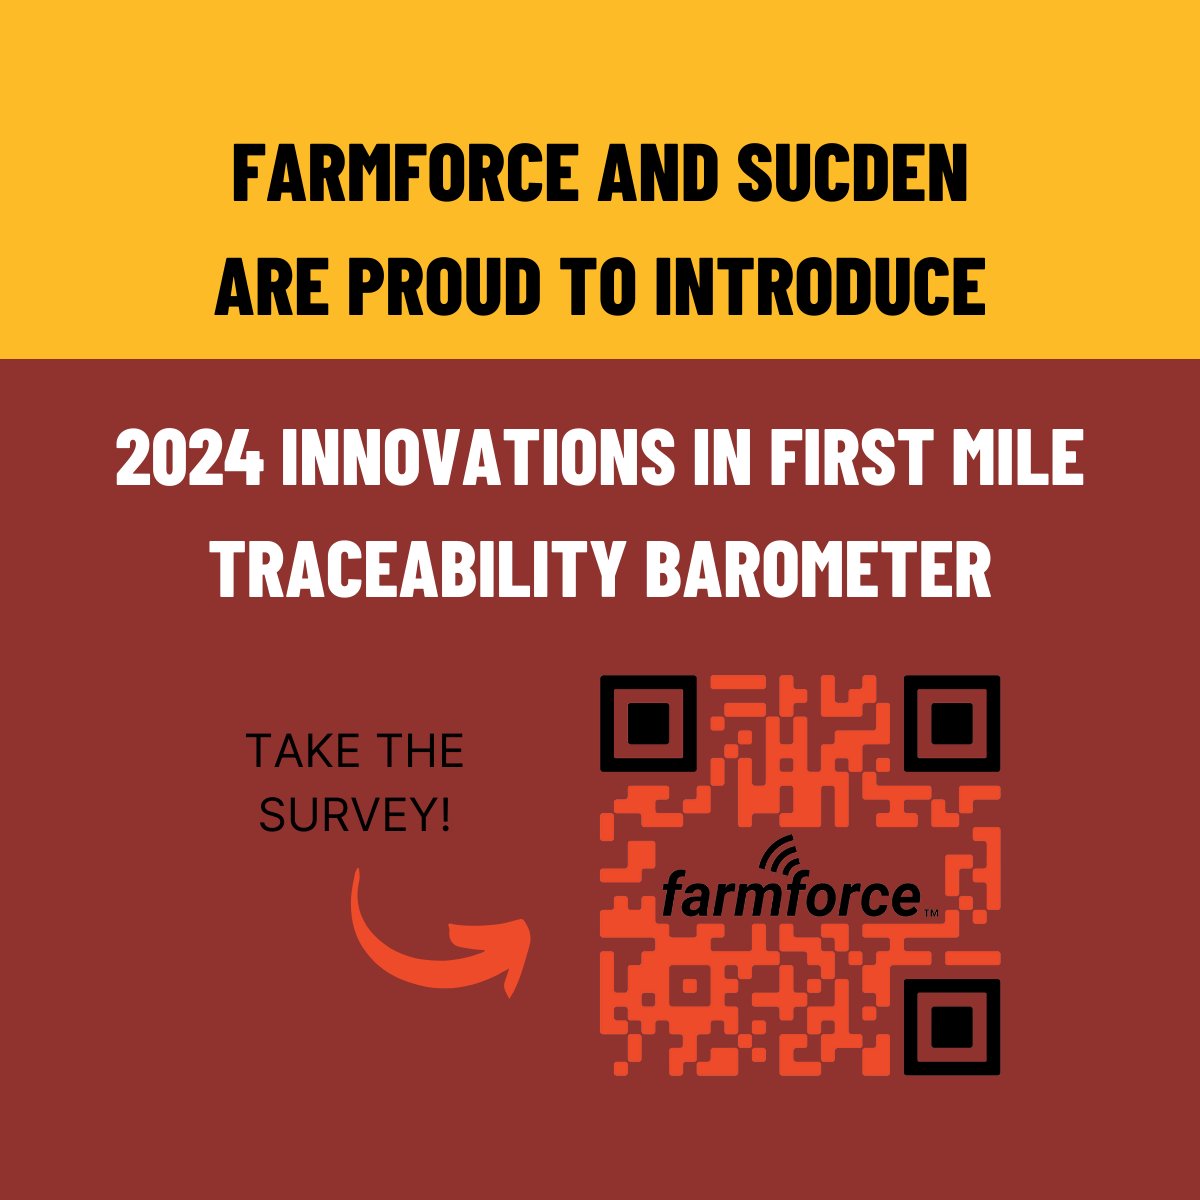 Calling all Sustainability Managers!  The Innovations Barometer survey (link) explores sustainable practices in traceability. Join the conversation! 

form.typeform.com/to/IhEzvRrK?ty…

#SustainabilityLeaders  #TraceabilitySolutions